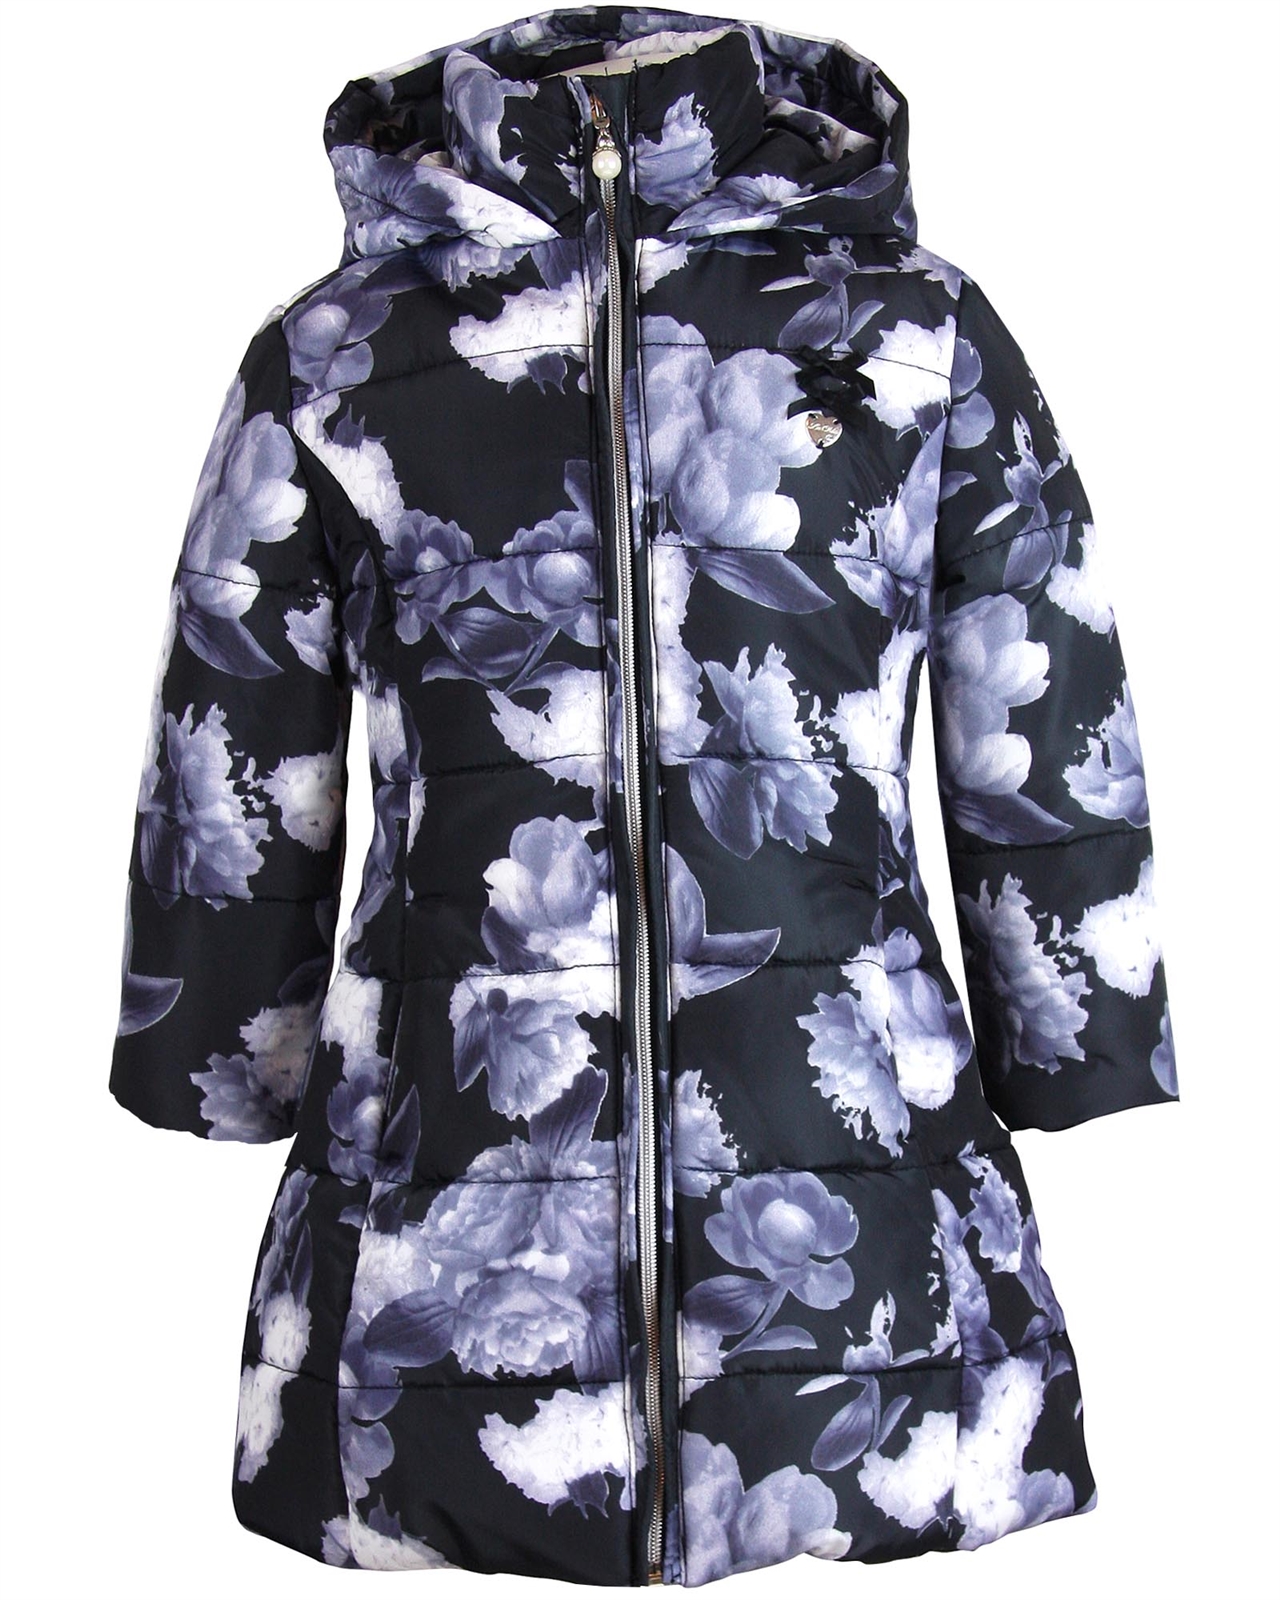 Le Chic Puffer Coat in Floral Print Black - Le Chic - Le Chic 2017/2018